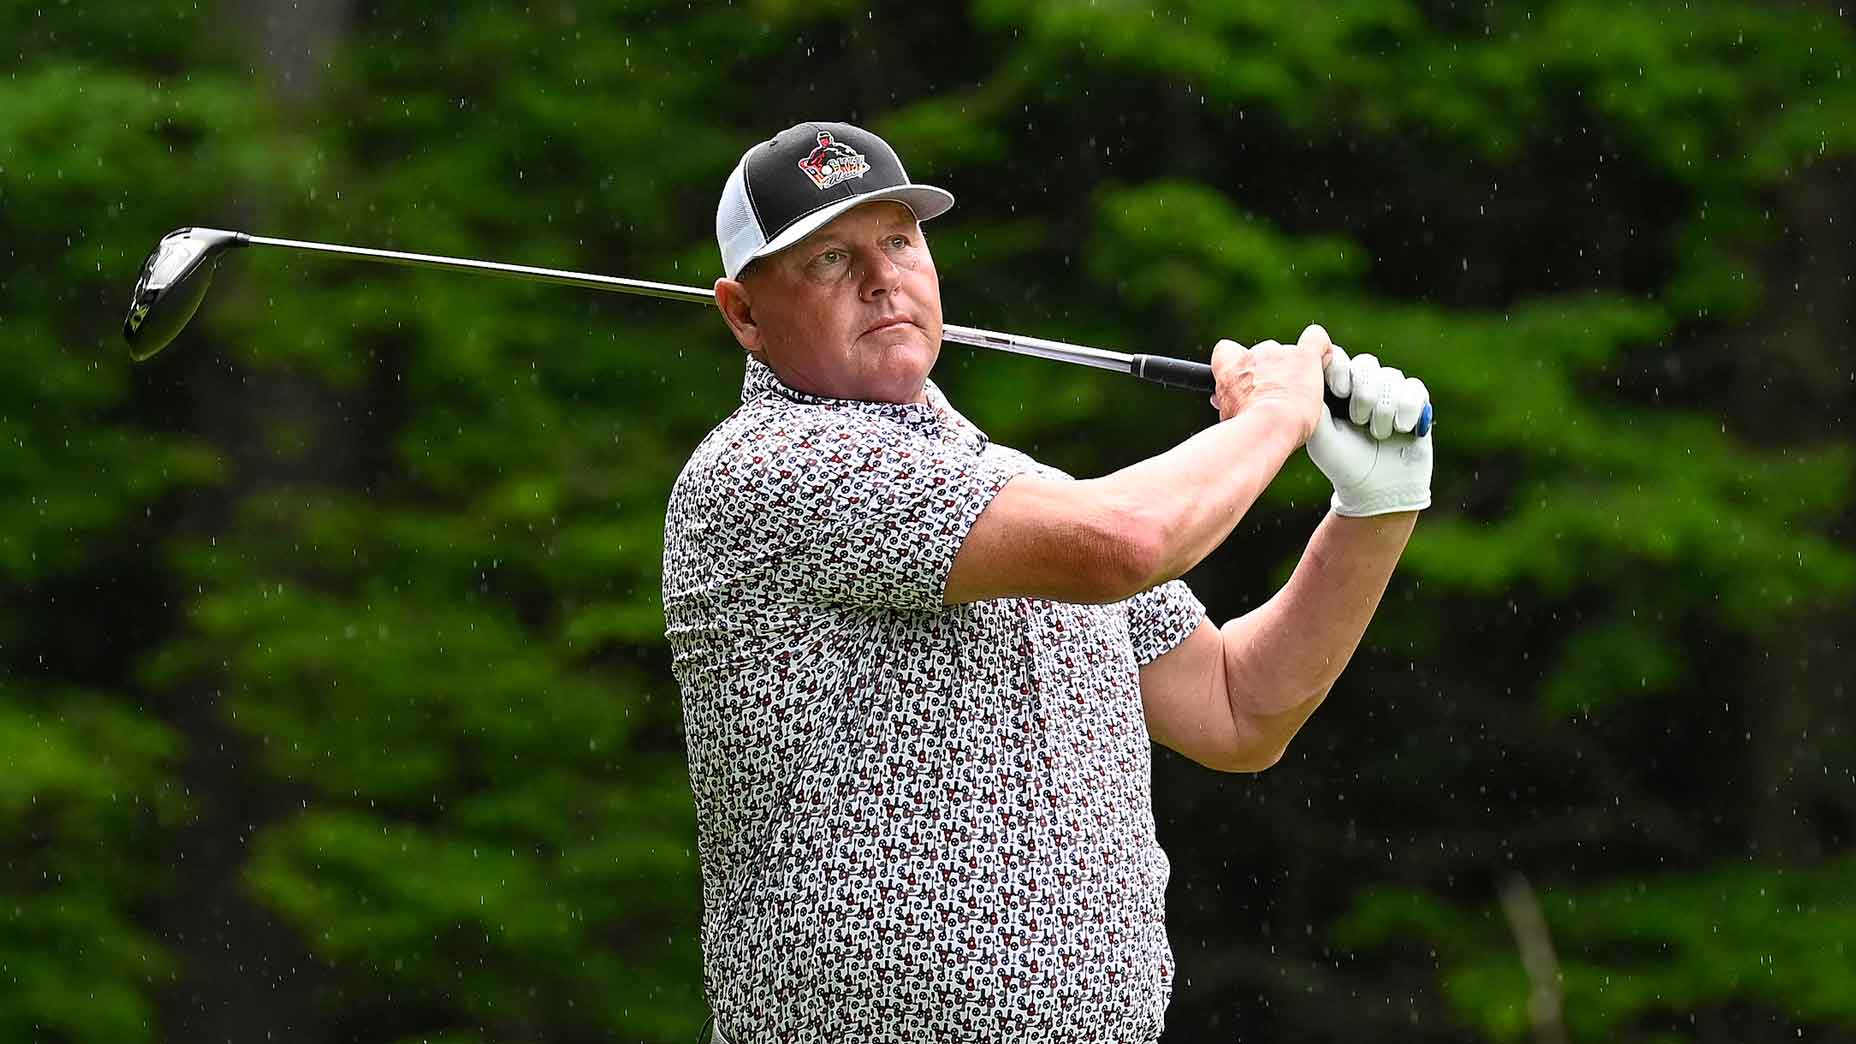 Roger Clemens tees off during the Drive Fore Kids charity golf event at Falmouth Country Club Saturday, June 24, 2023